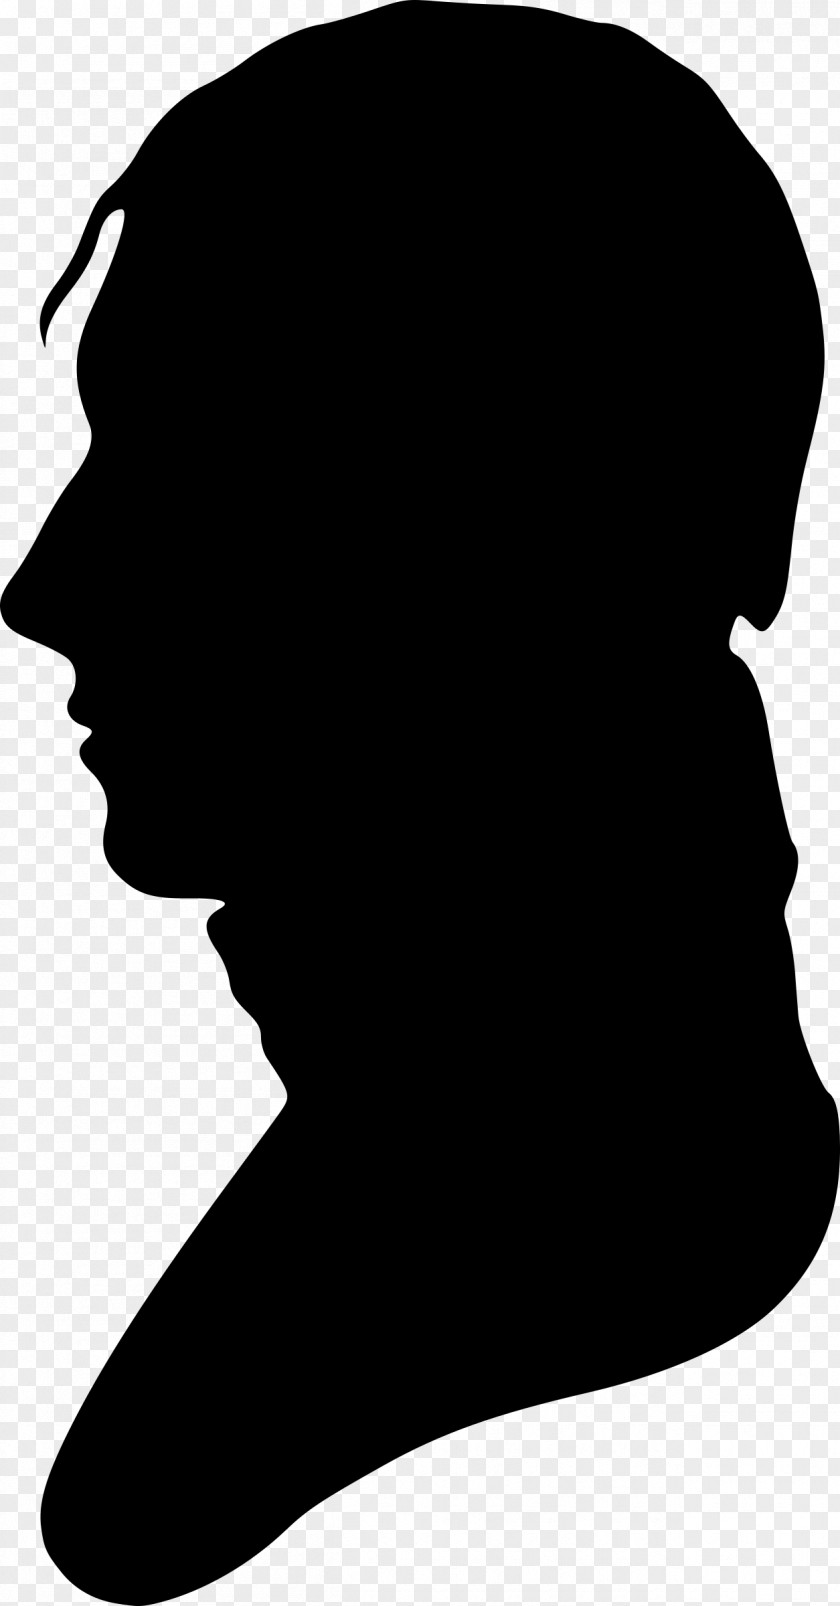 Stalin Silhouette Clip Art PNG